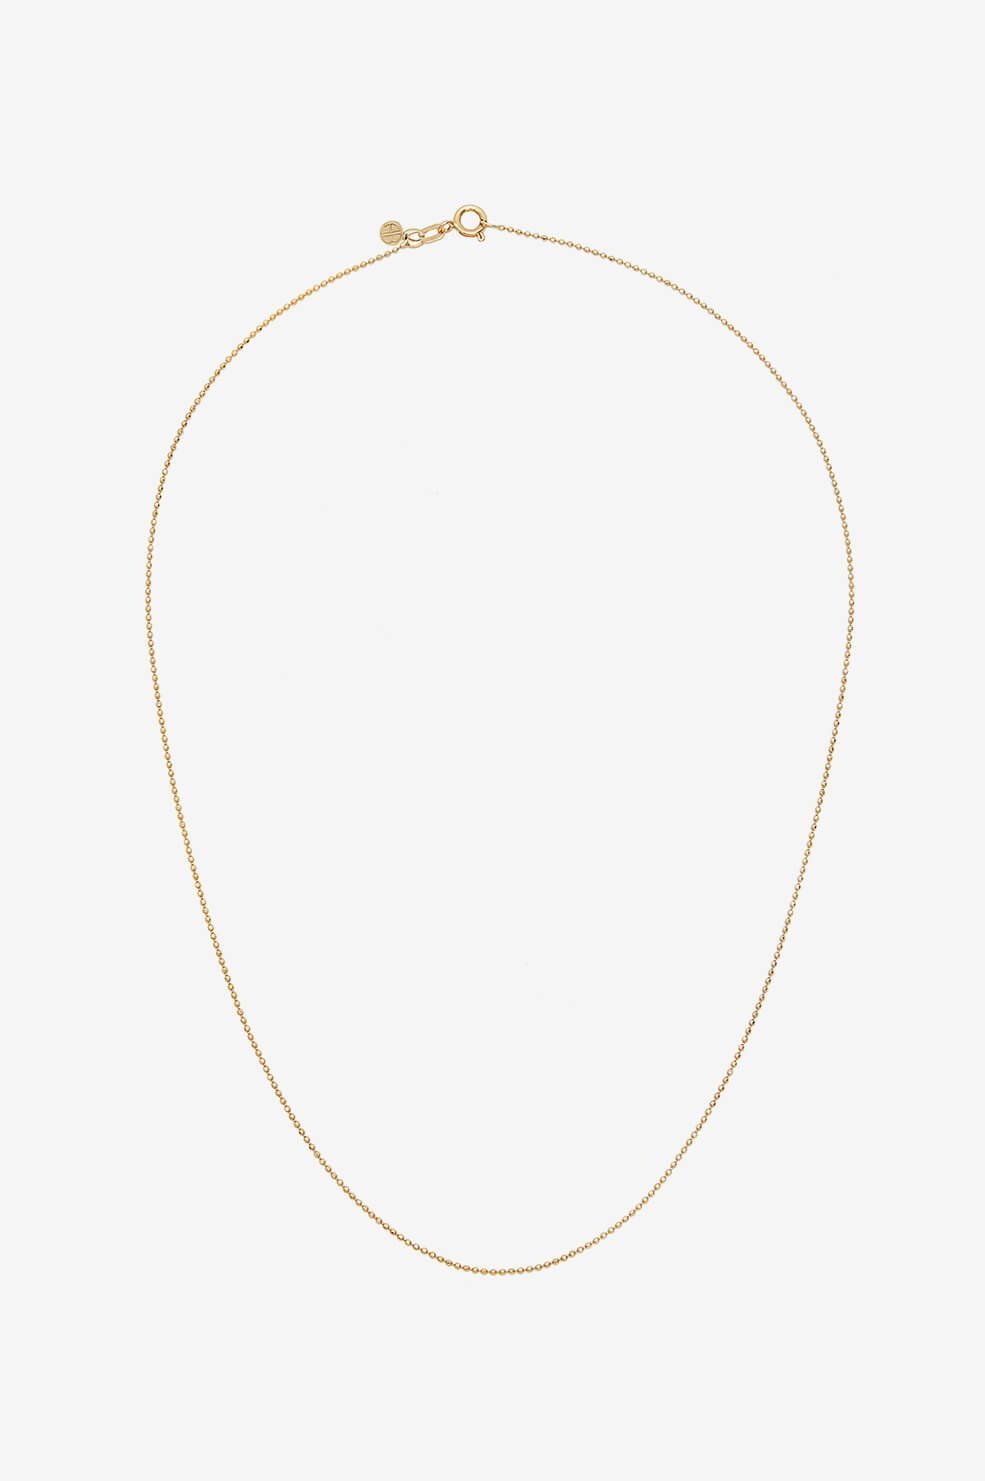 Anine Bing - Beaded Chain Necklace in Gold